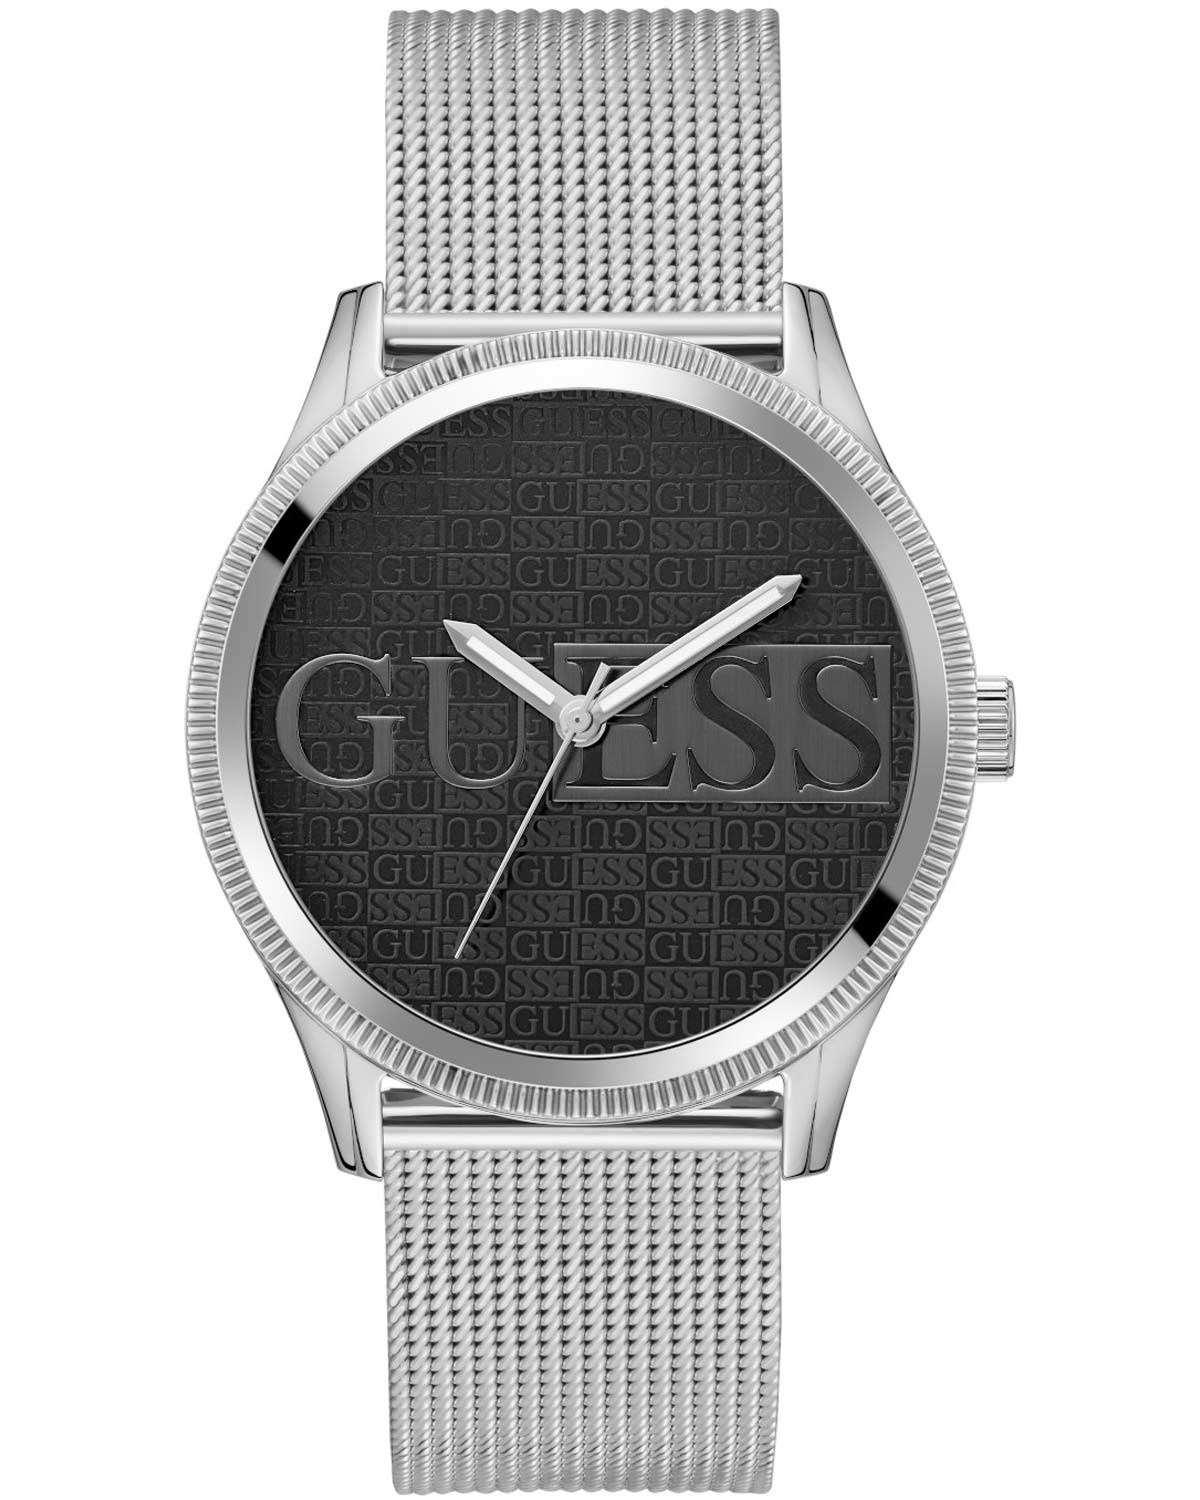 GUESS Reputation - GW0710G1, Silver case with Stainless Steel Bracelet